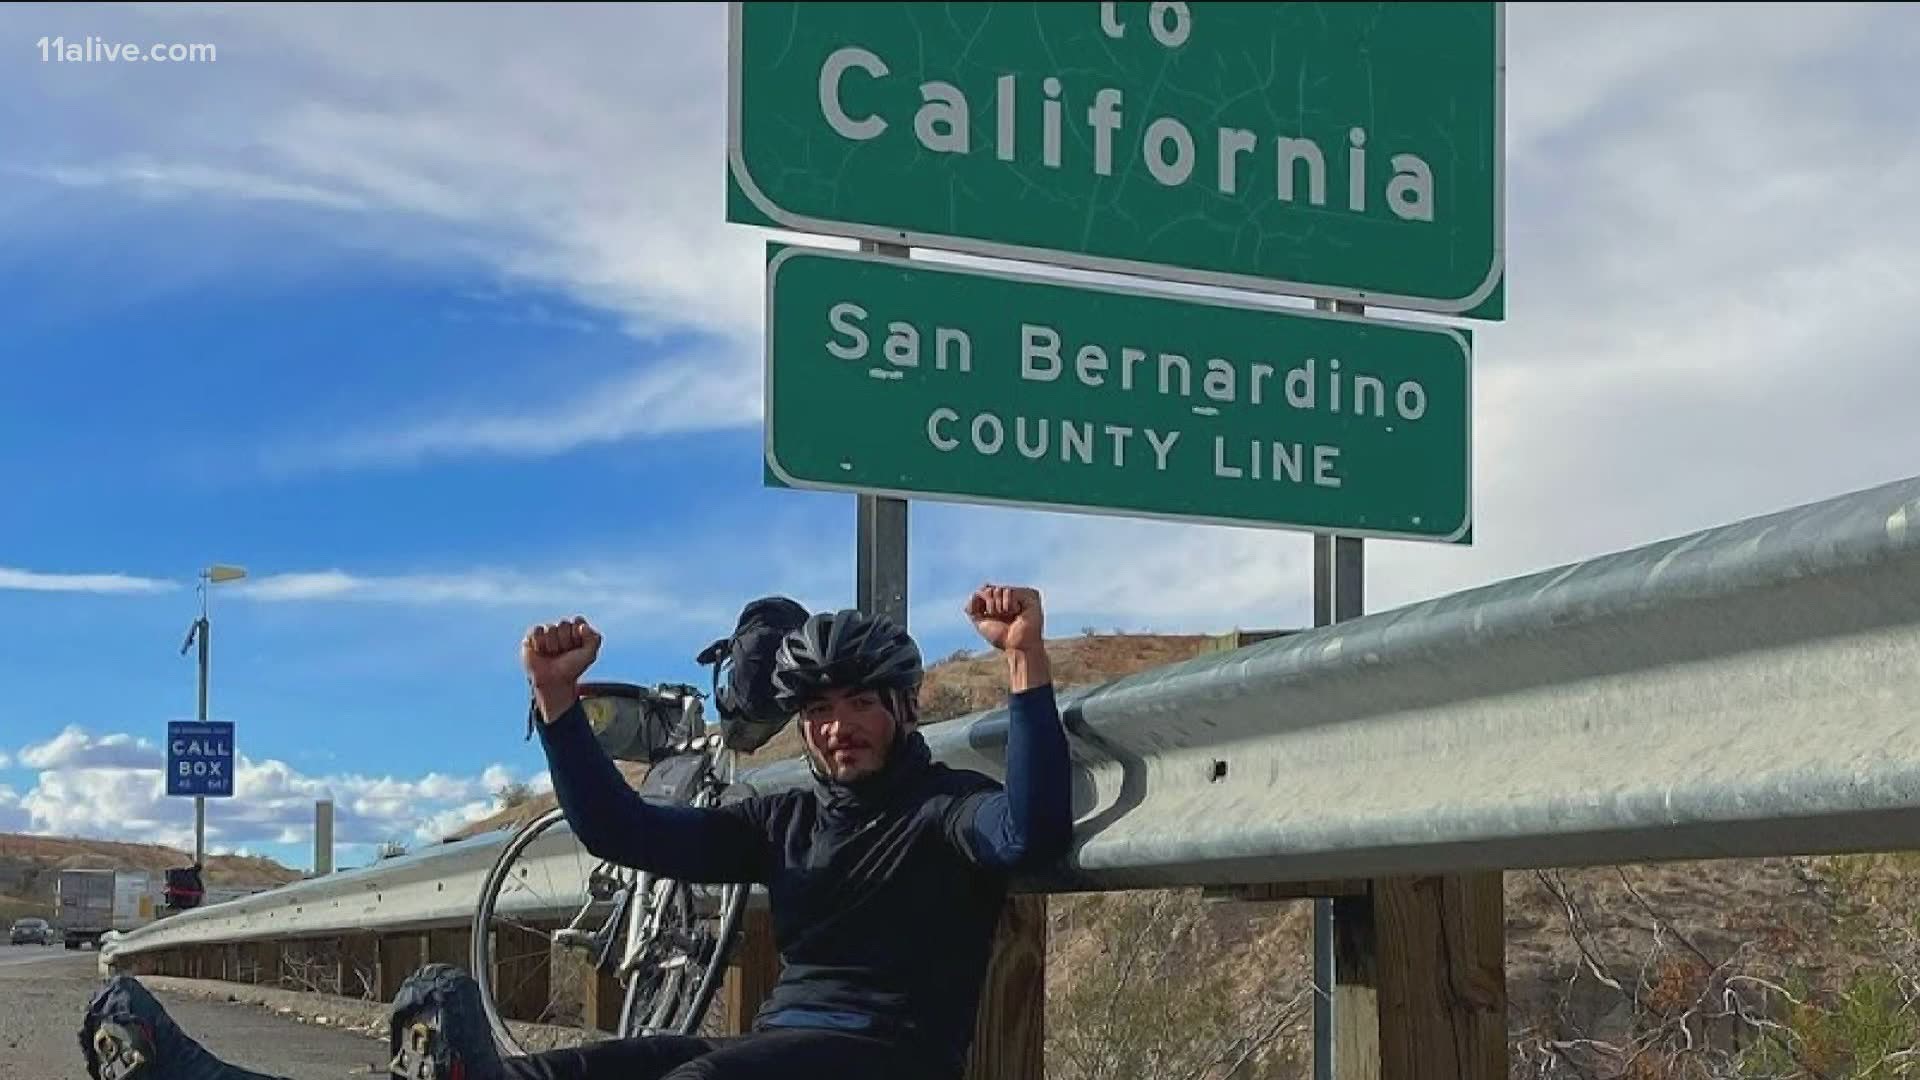 It took Ali Amirfazli about a month to bike more than 2,000 miles from Georgia to California.